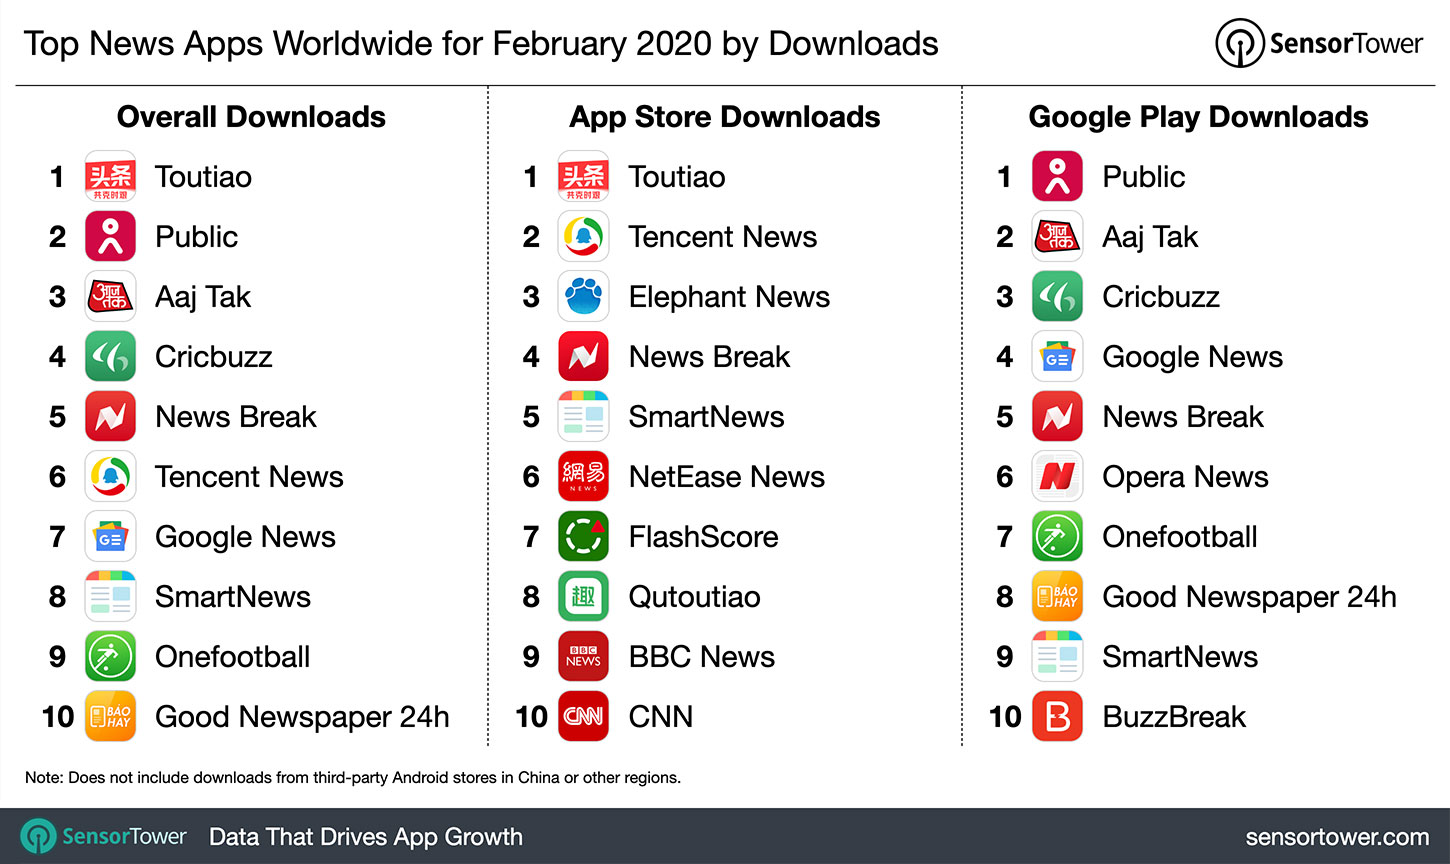 Top News Apps Worldwide for February 2020 by Downloads